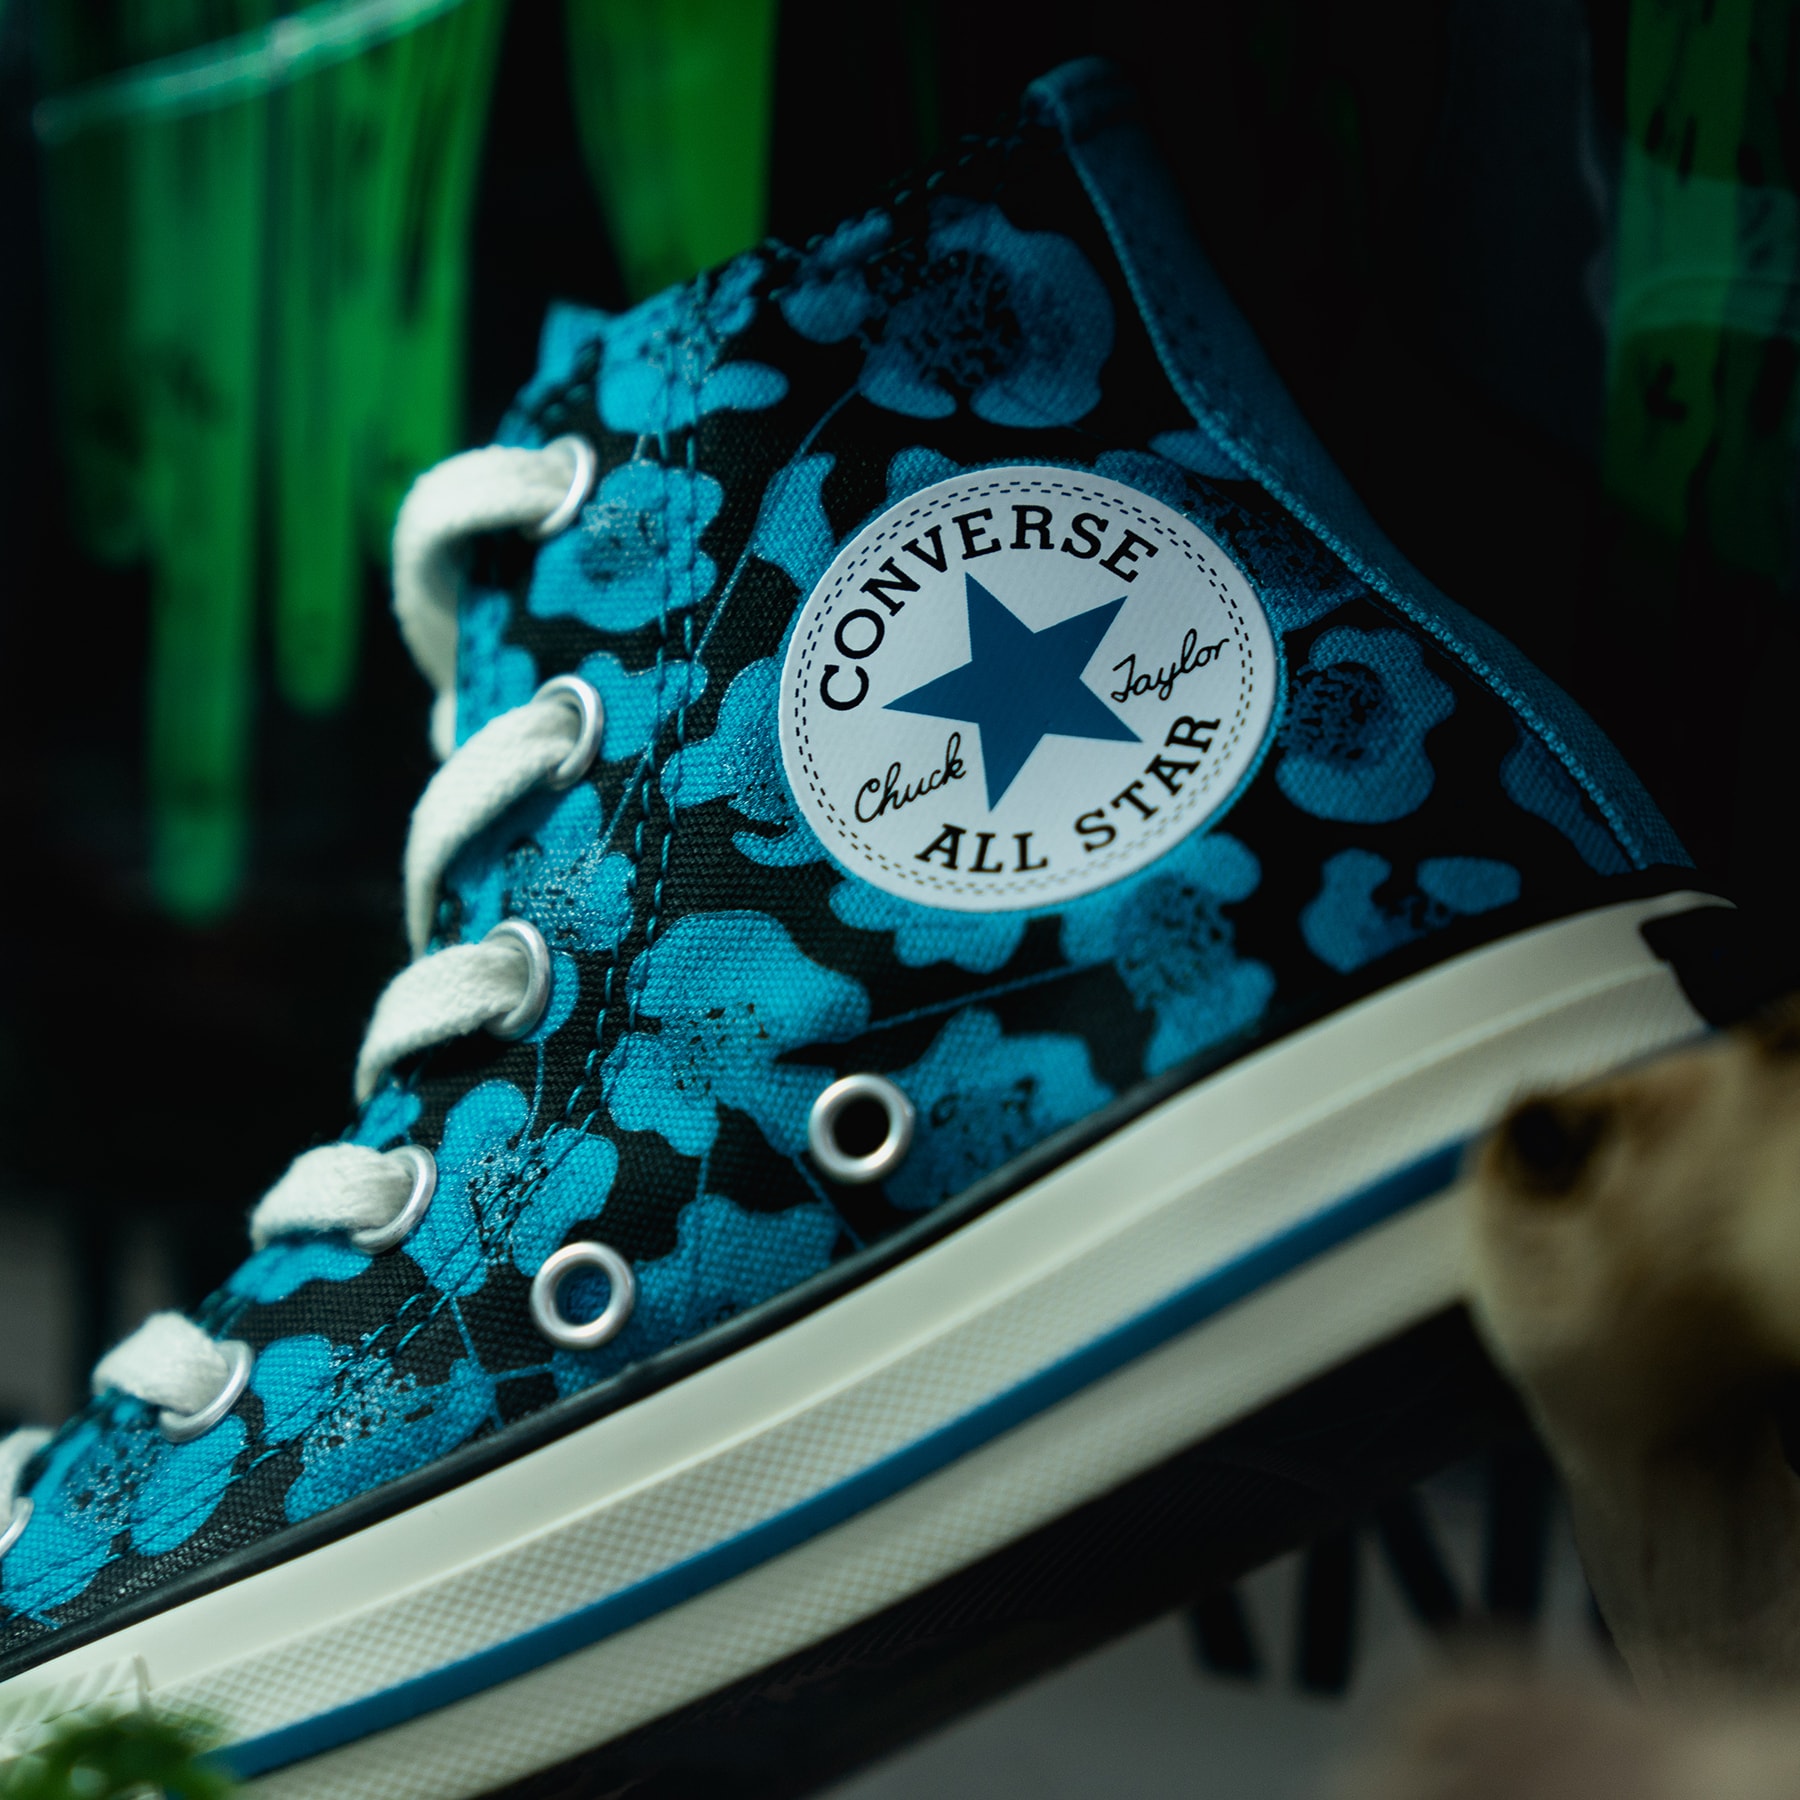 Dr Woo x Converse Chuck Taylor hypekids Giveaway Leopard print blue orange raffle free how to buy